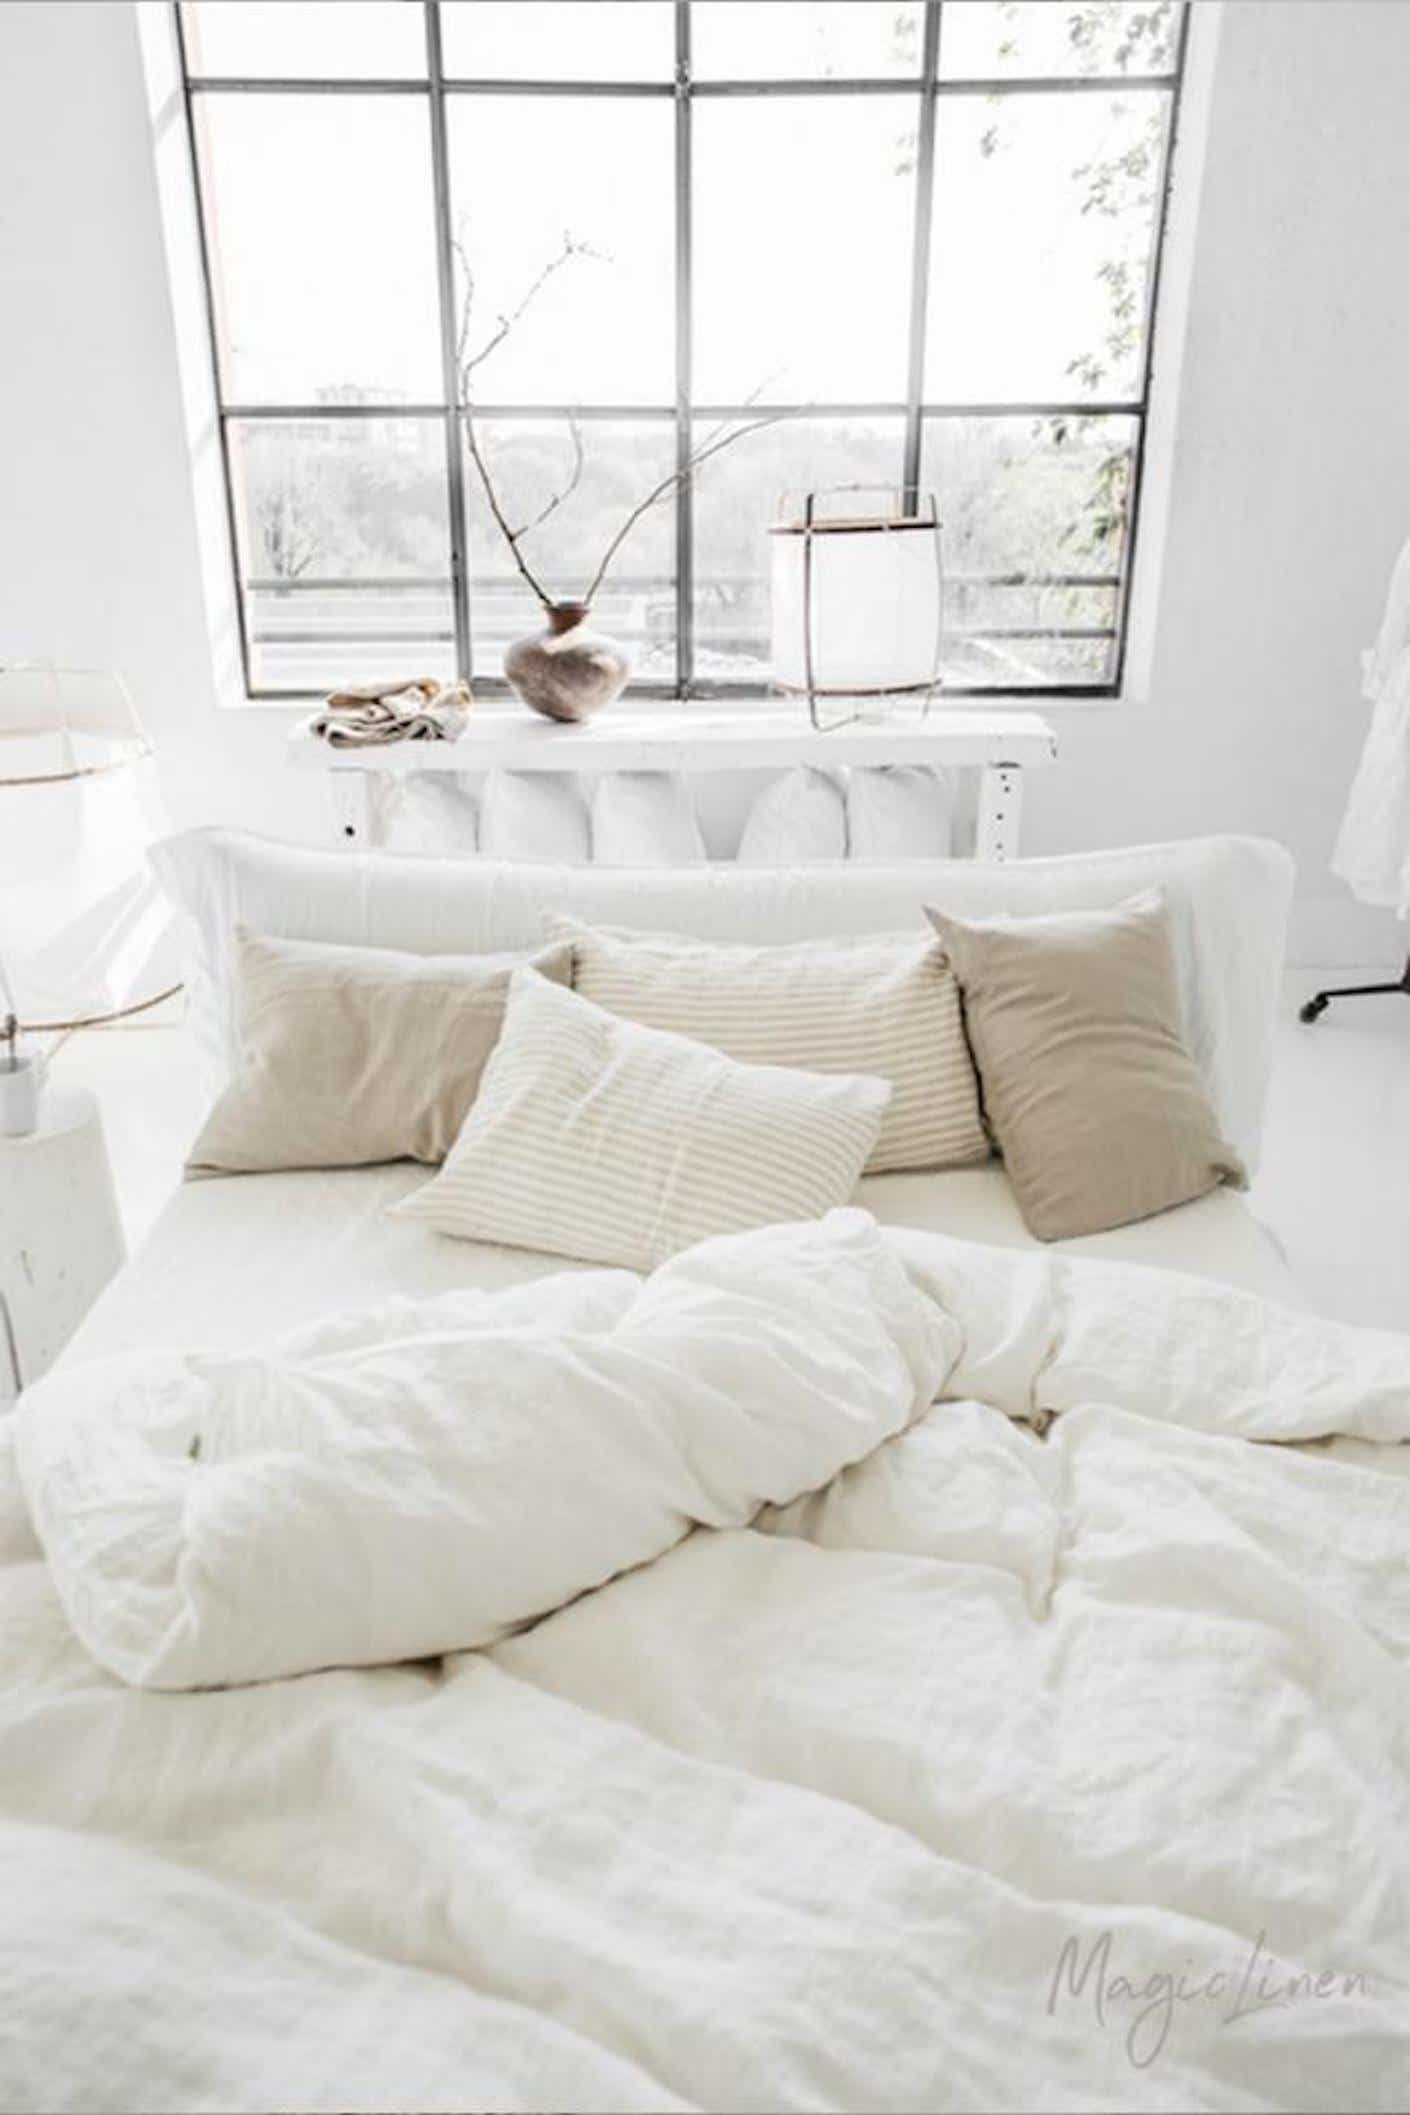 A white bed is covered in rumpled yet plush white sheets and duvet.